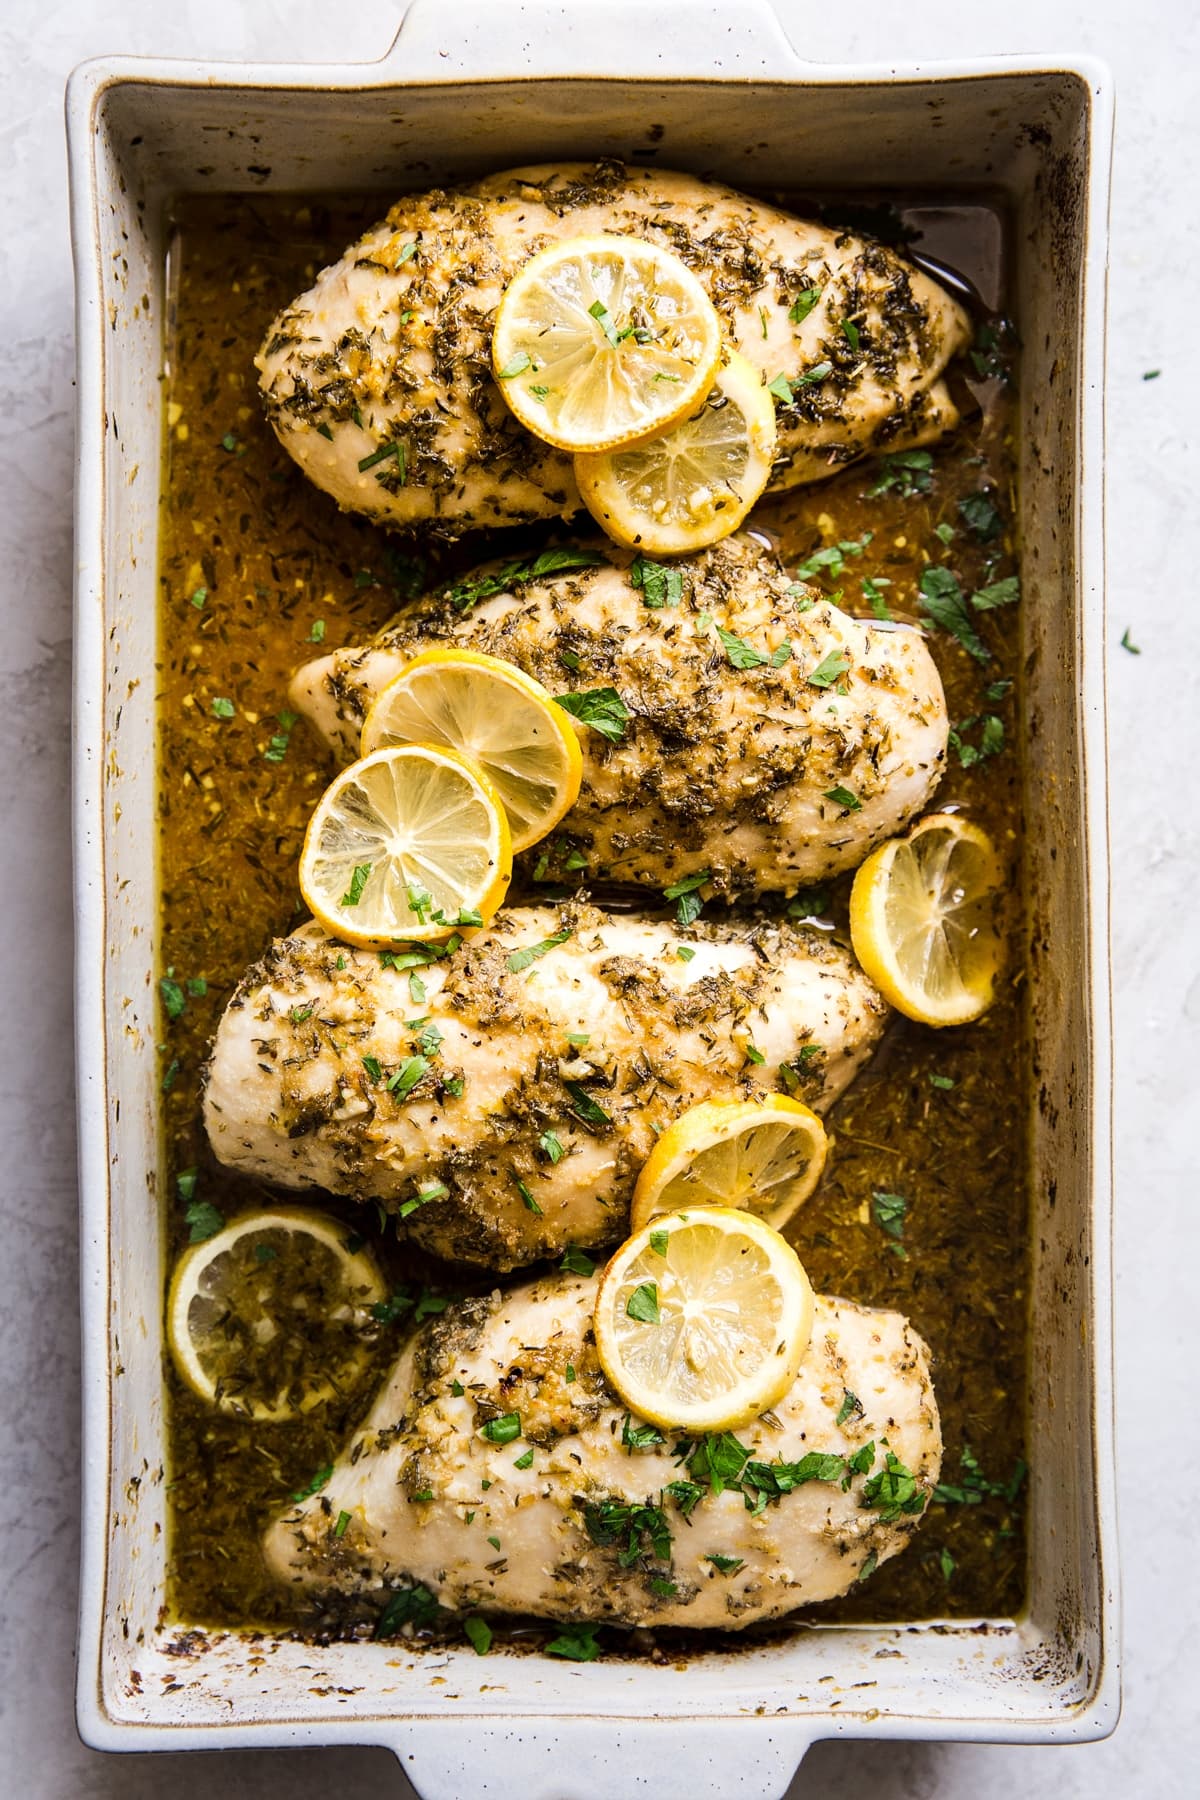 Lemon garlic Chicken breasts baked in a baking dish  topped with